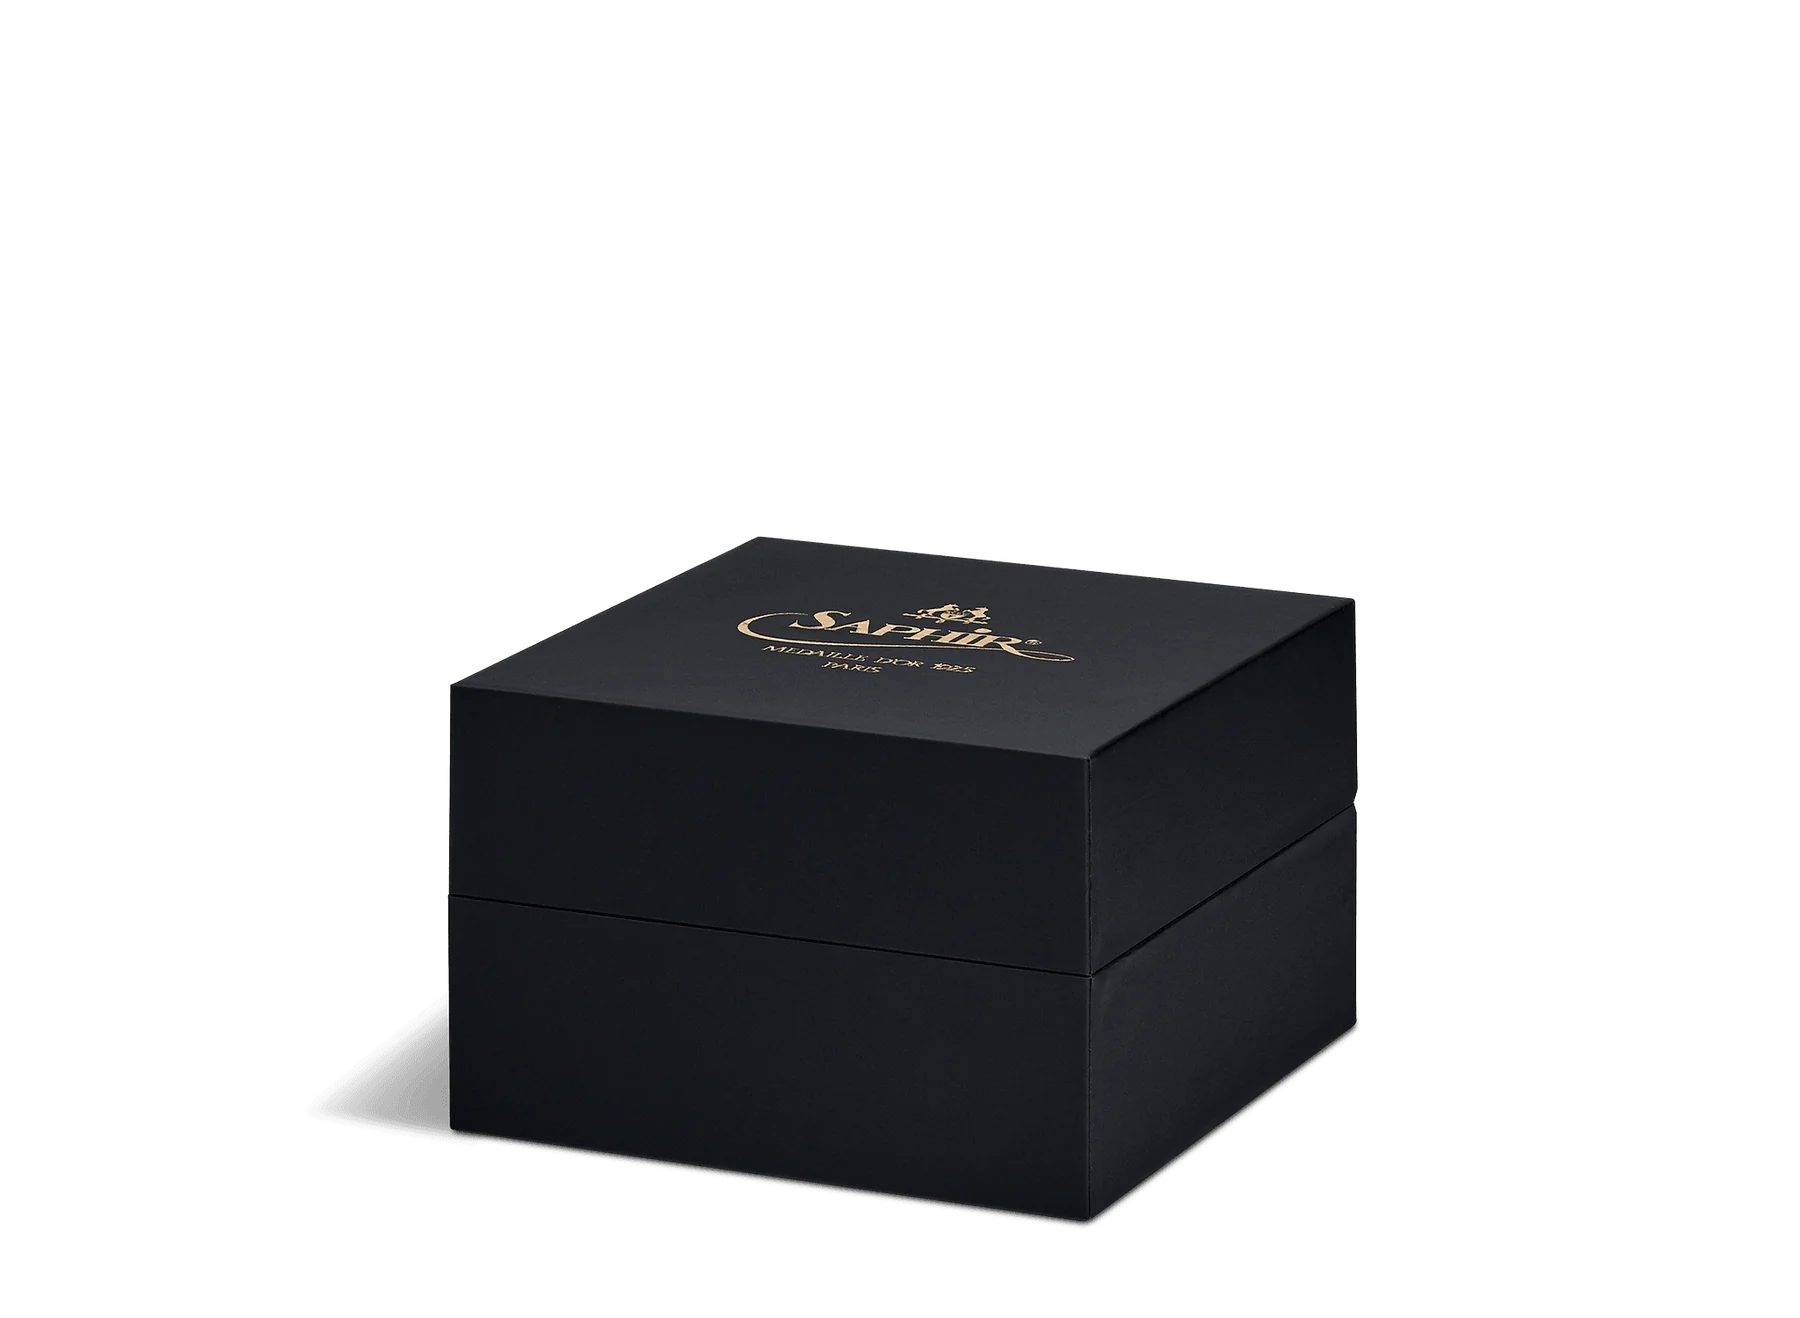 Saphir Médaille d'Or Ecrin shoe presented in a box, is perfect for a gift.    It contains one (1) each of the following:  1 x Black Creme Polish 1925 Pommadier 1 x Polishing cloth 1 x Spreading brush 1 x Mini polish brush